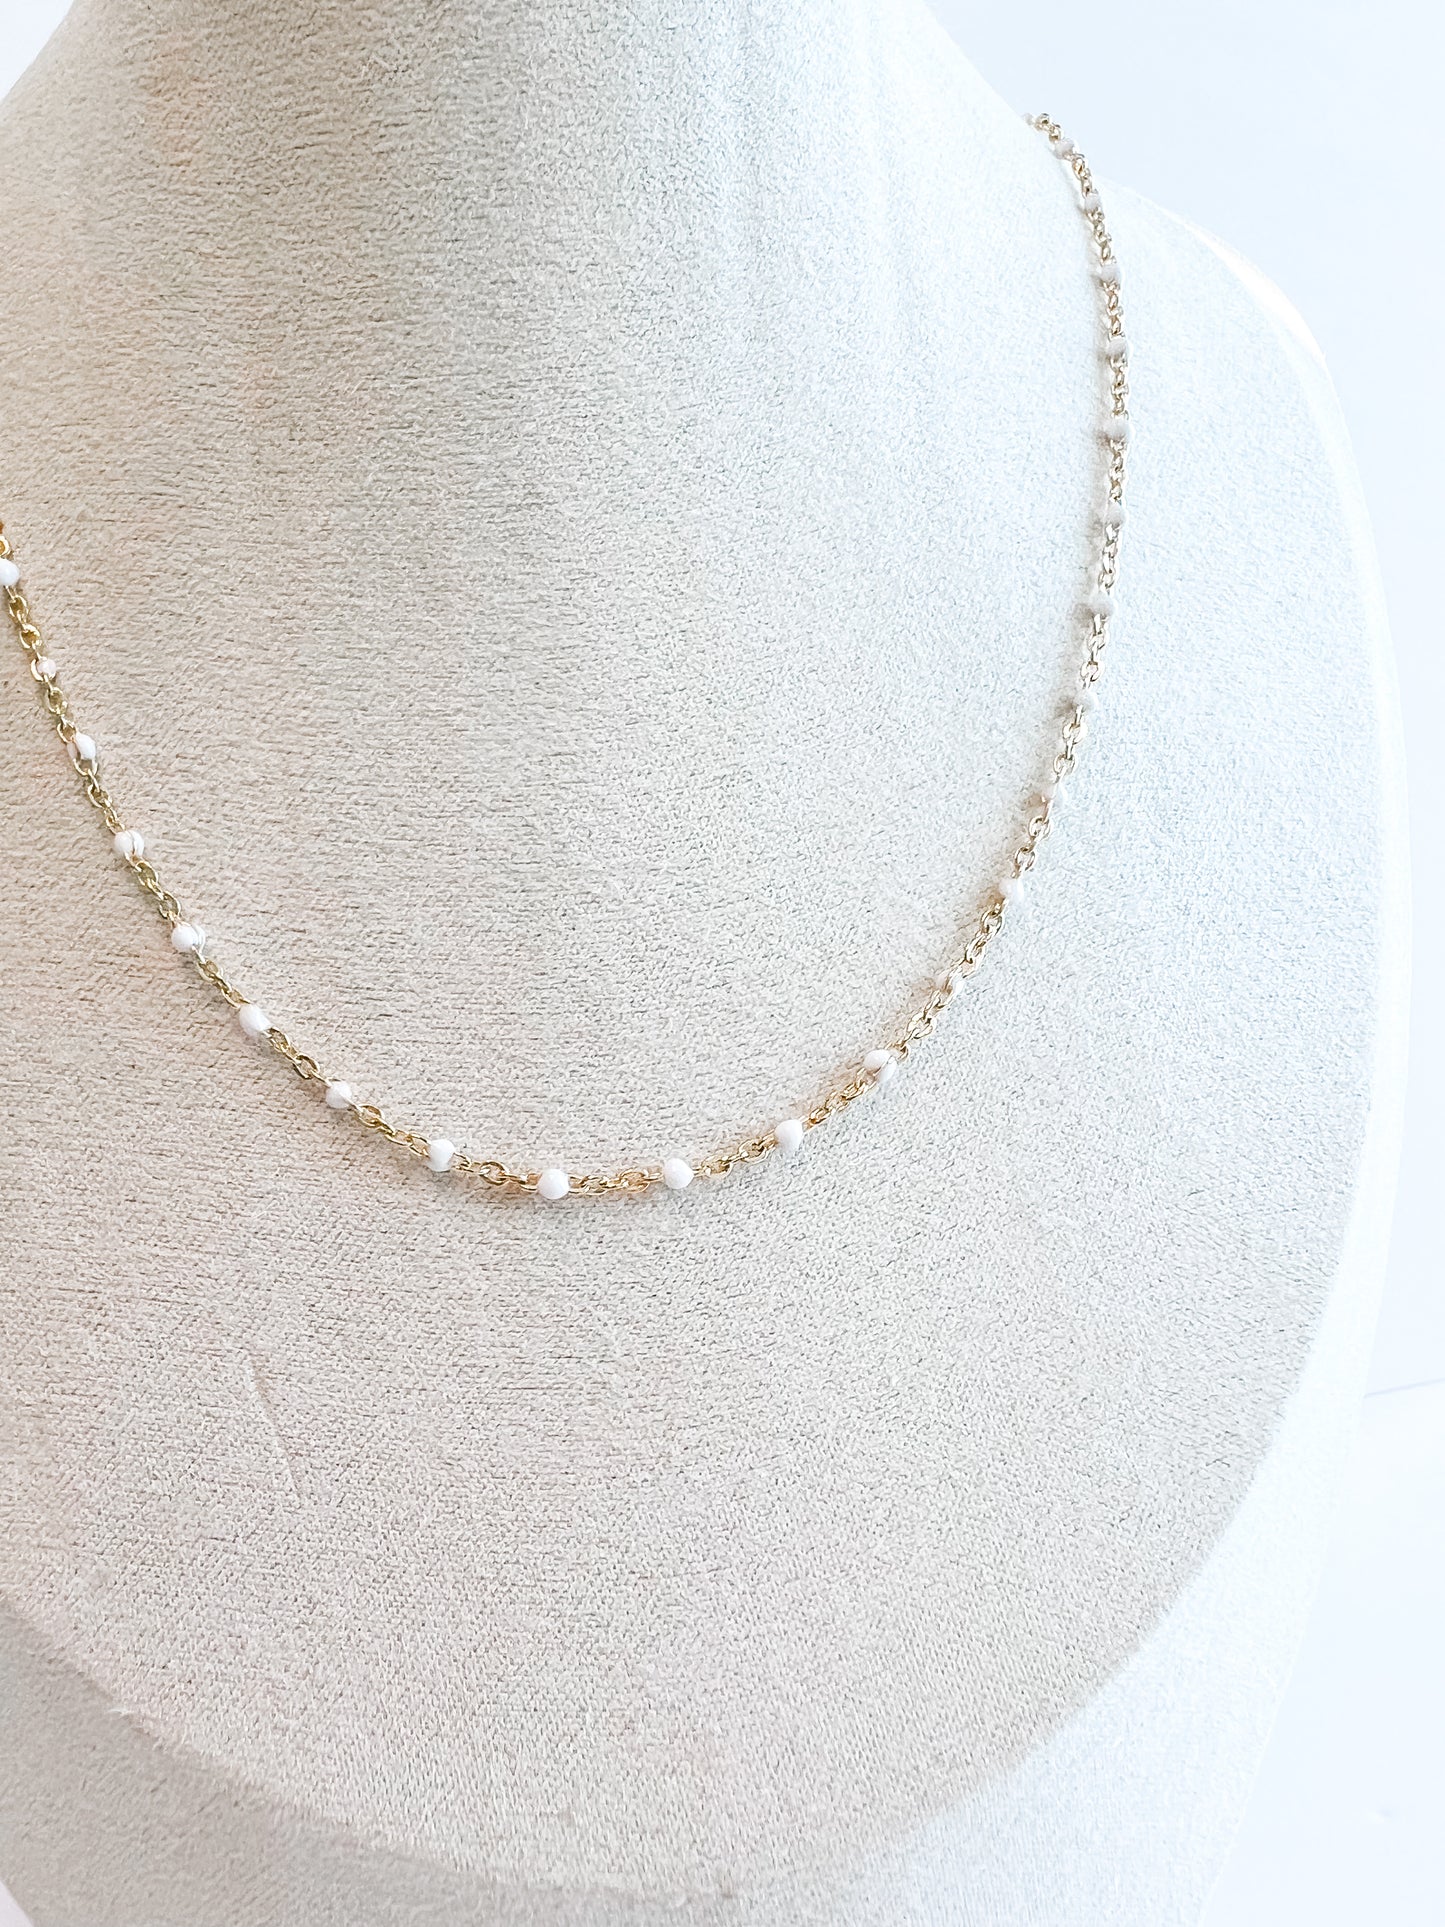 RYLIE | gold-filled chain with enamel accent